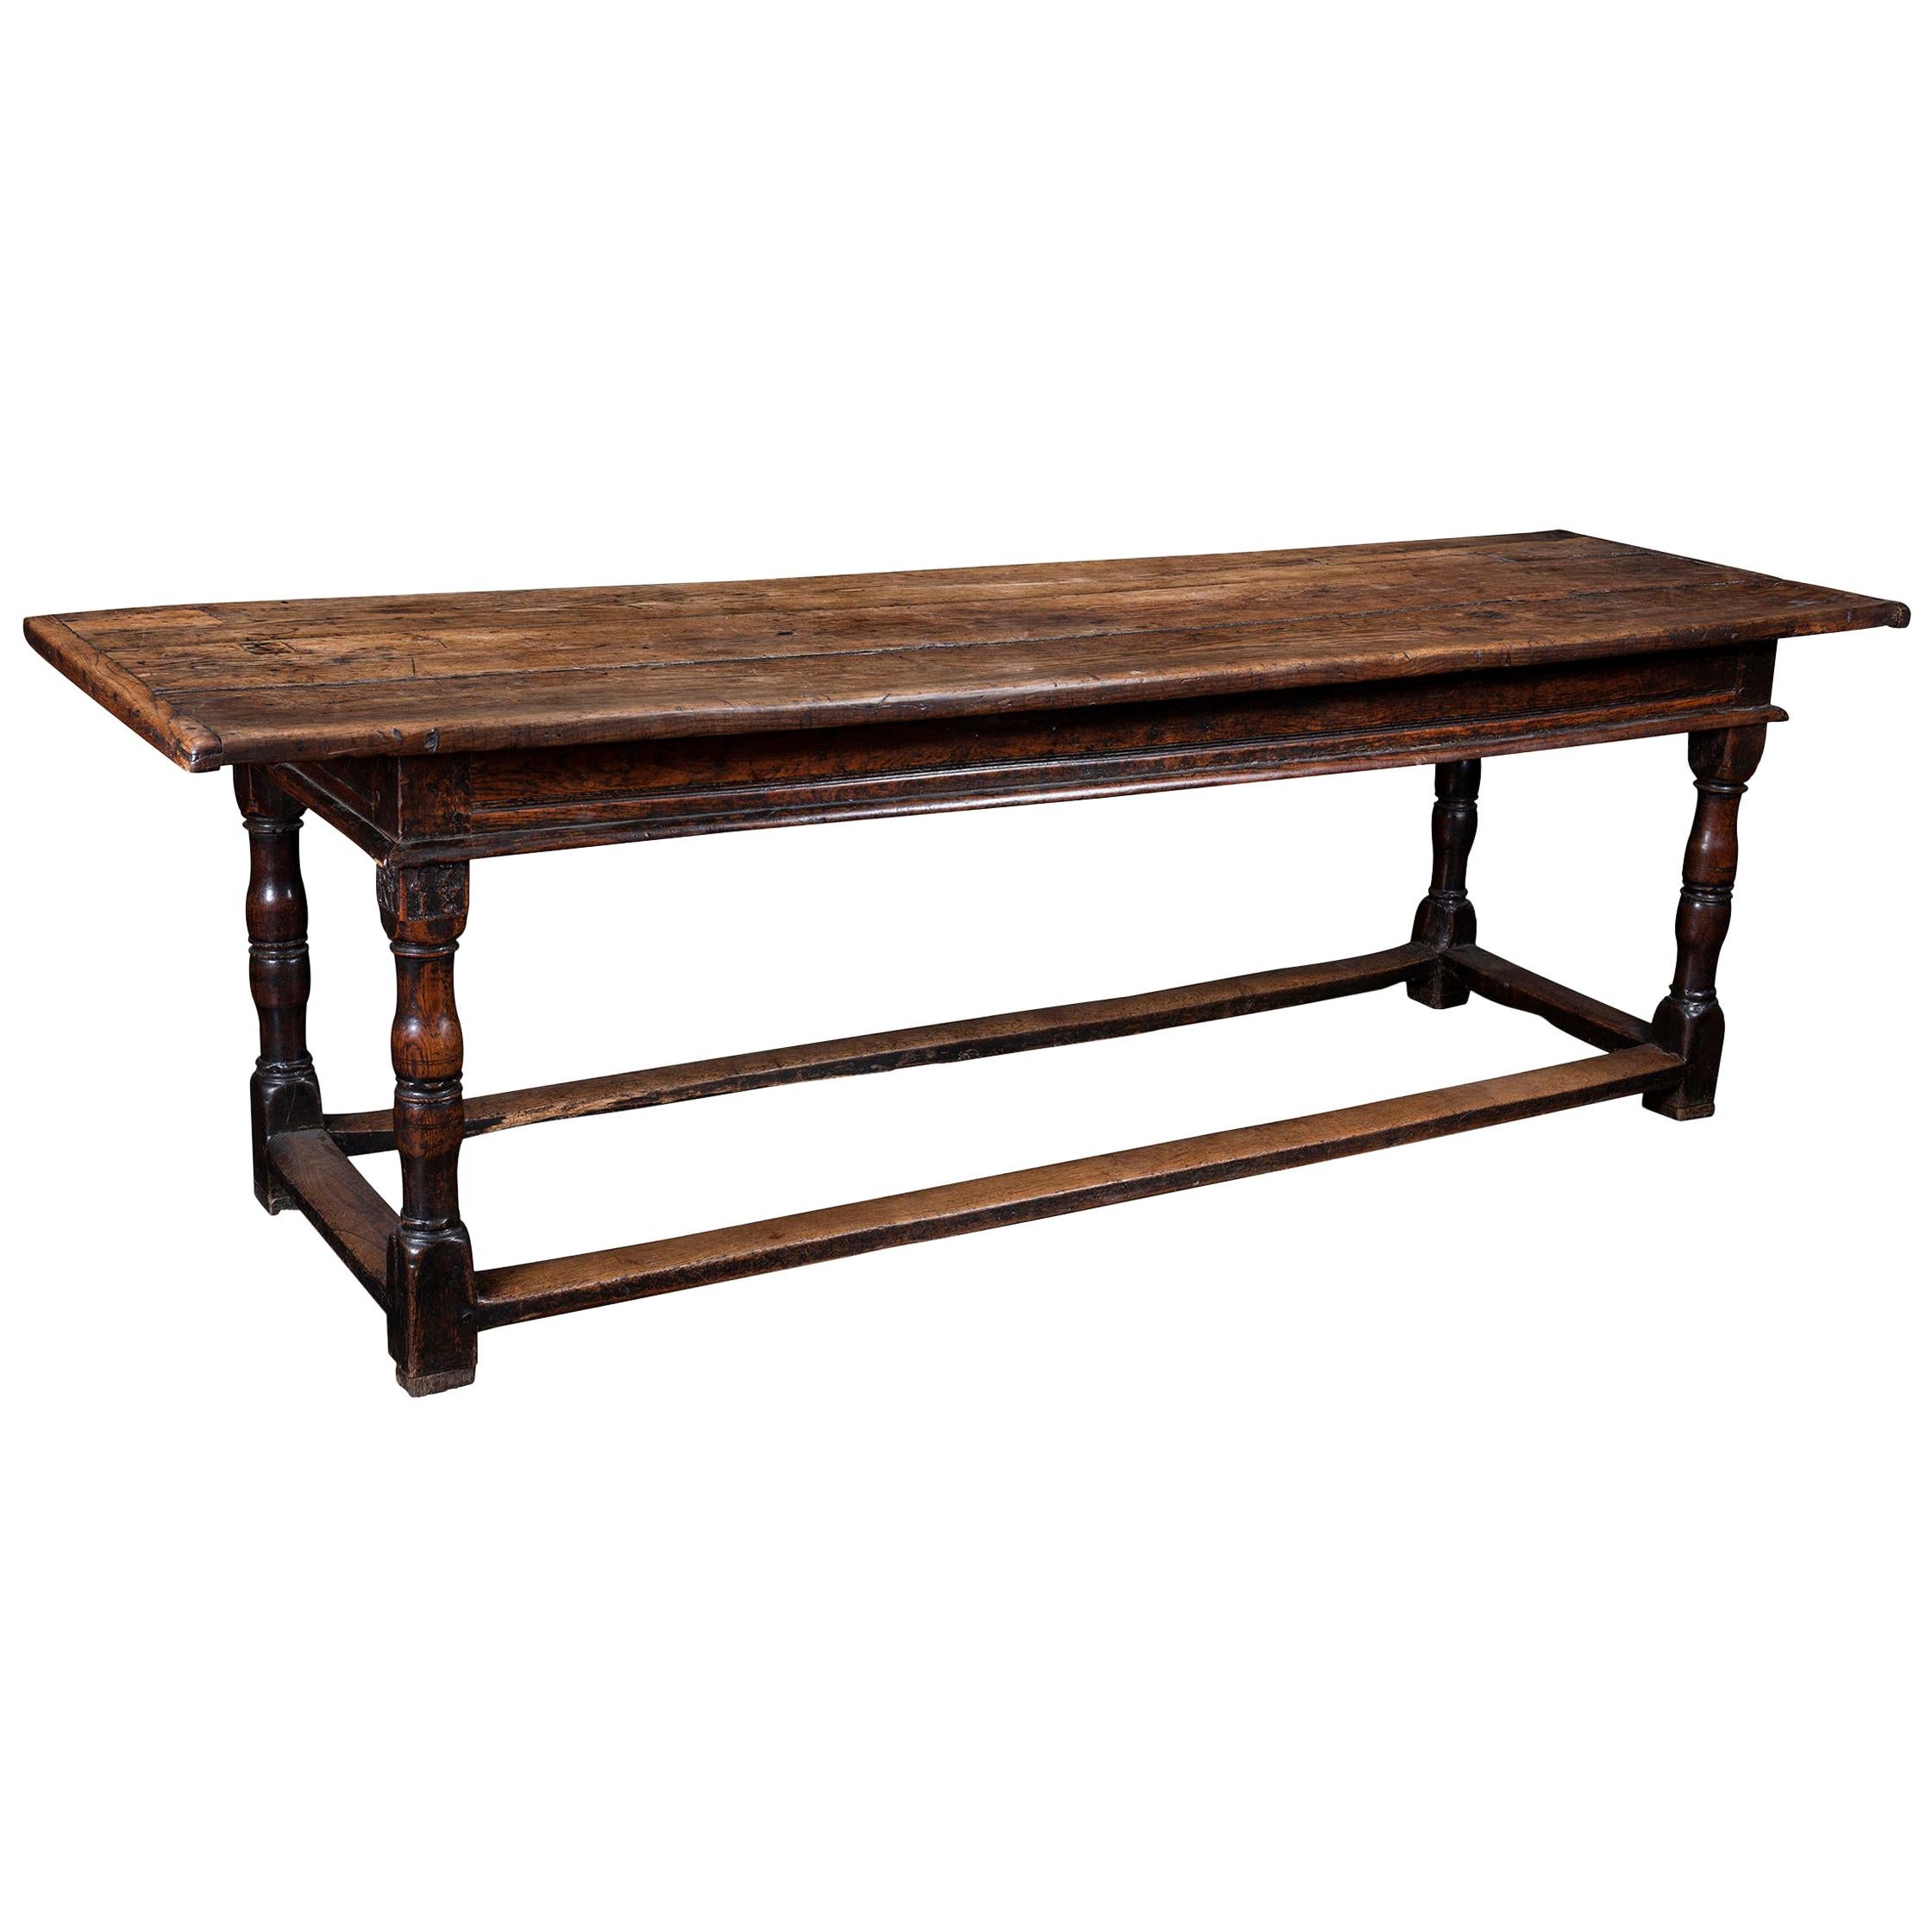 Early 18th Century English Oak Refectory Table